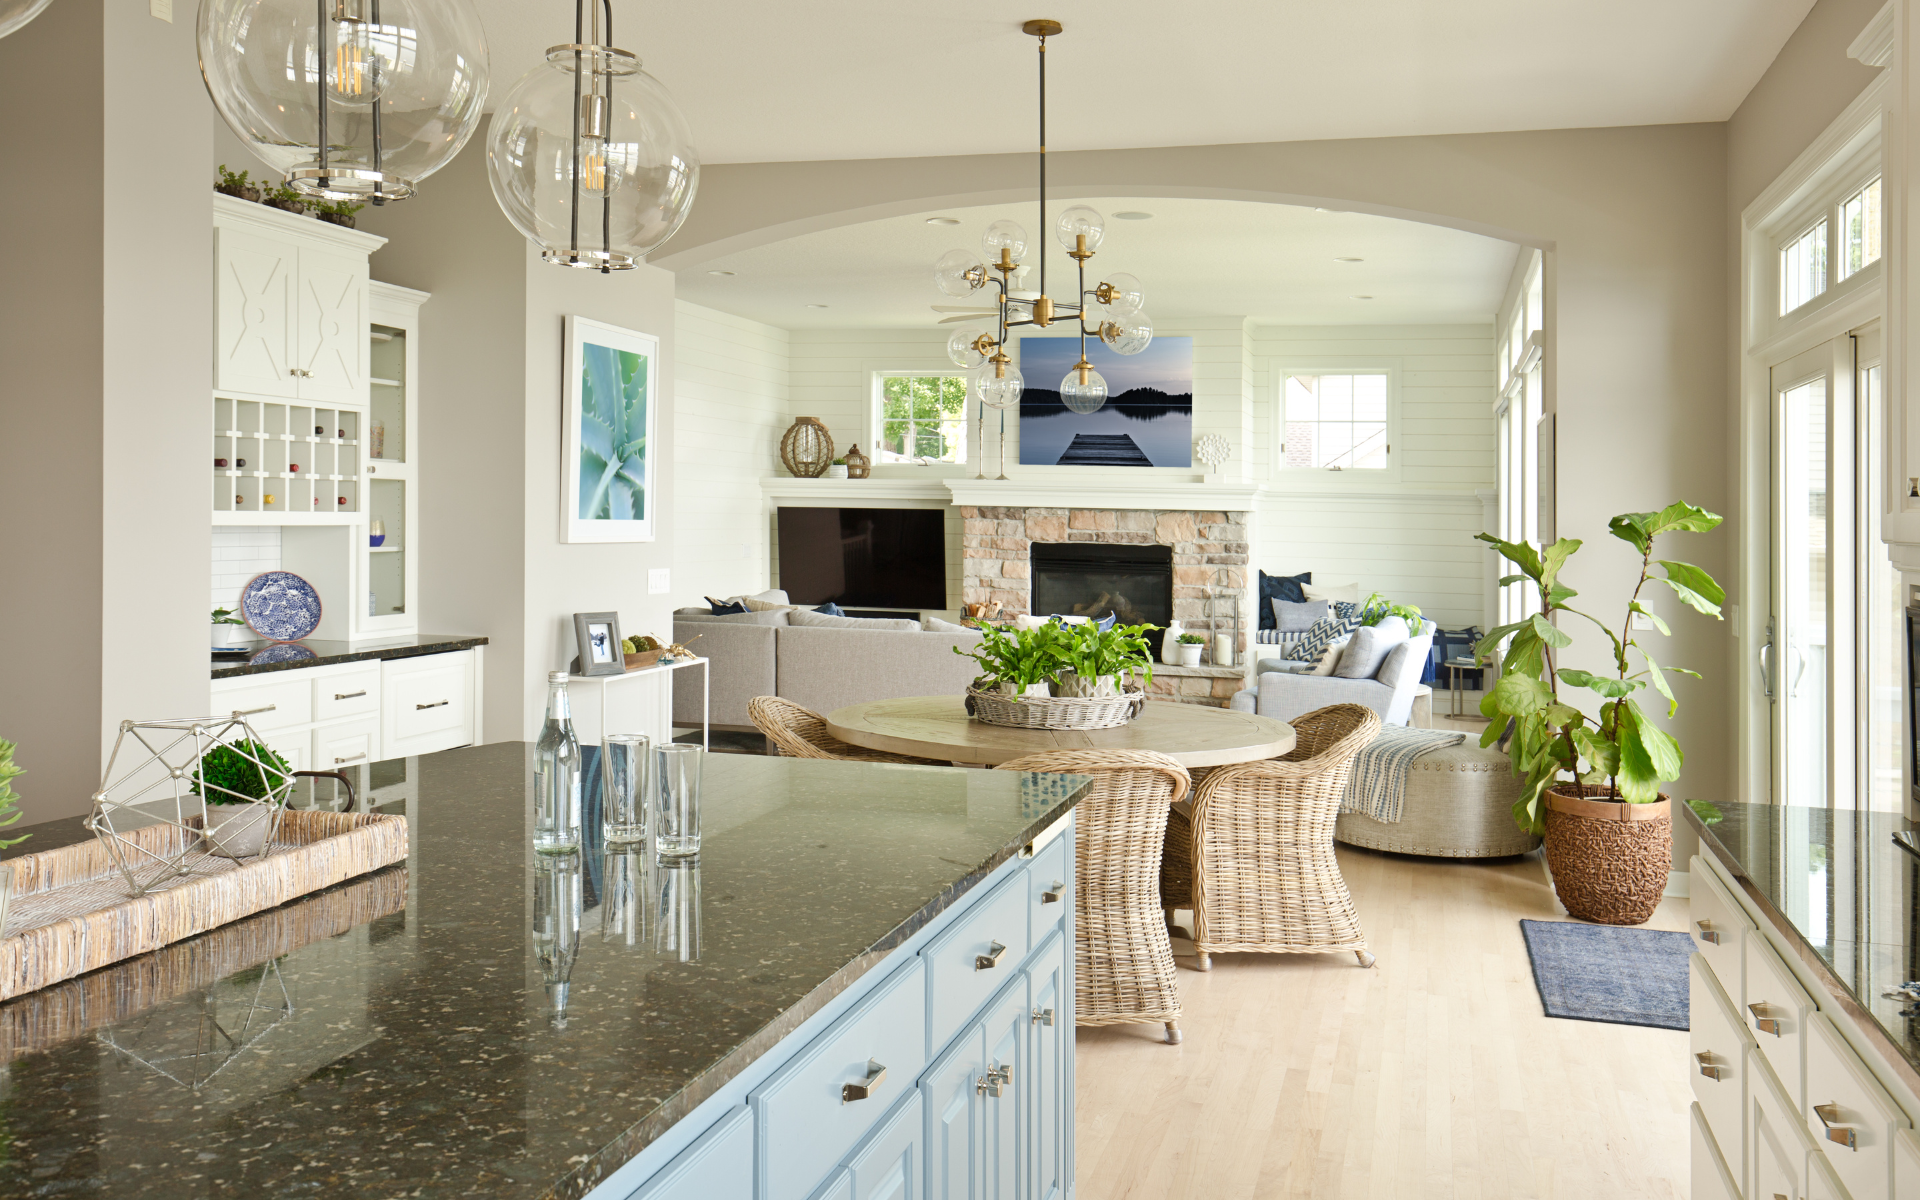 Open concept kitchen with granite countertop